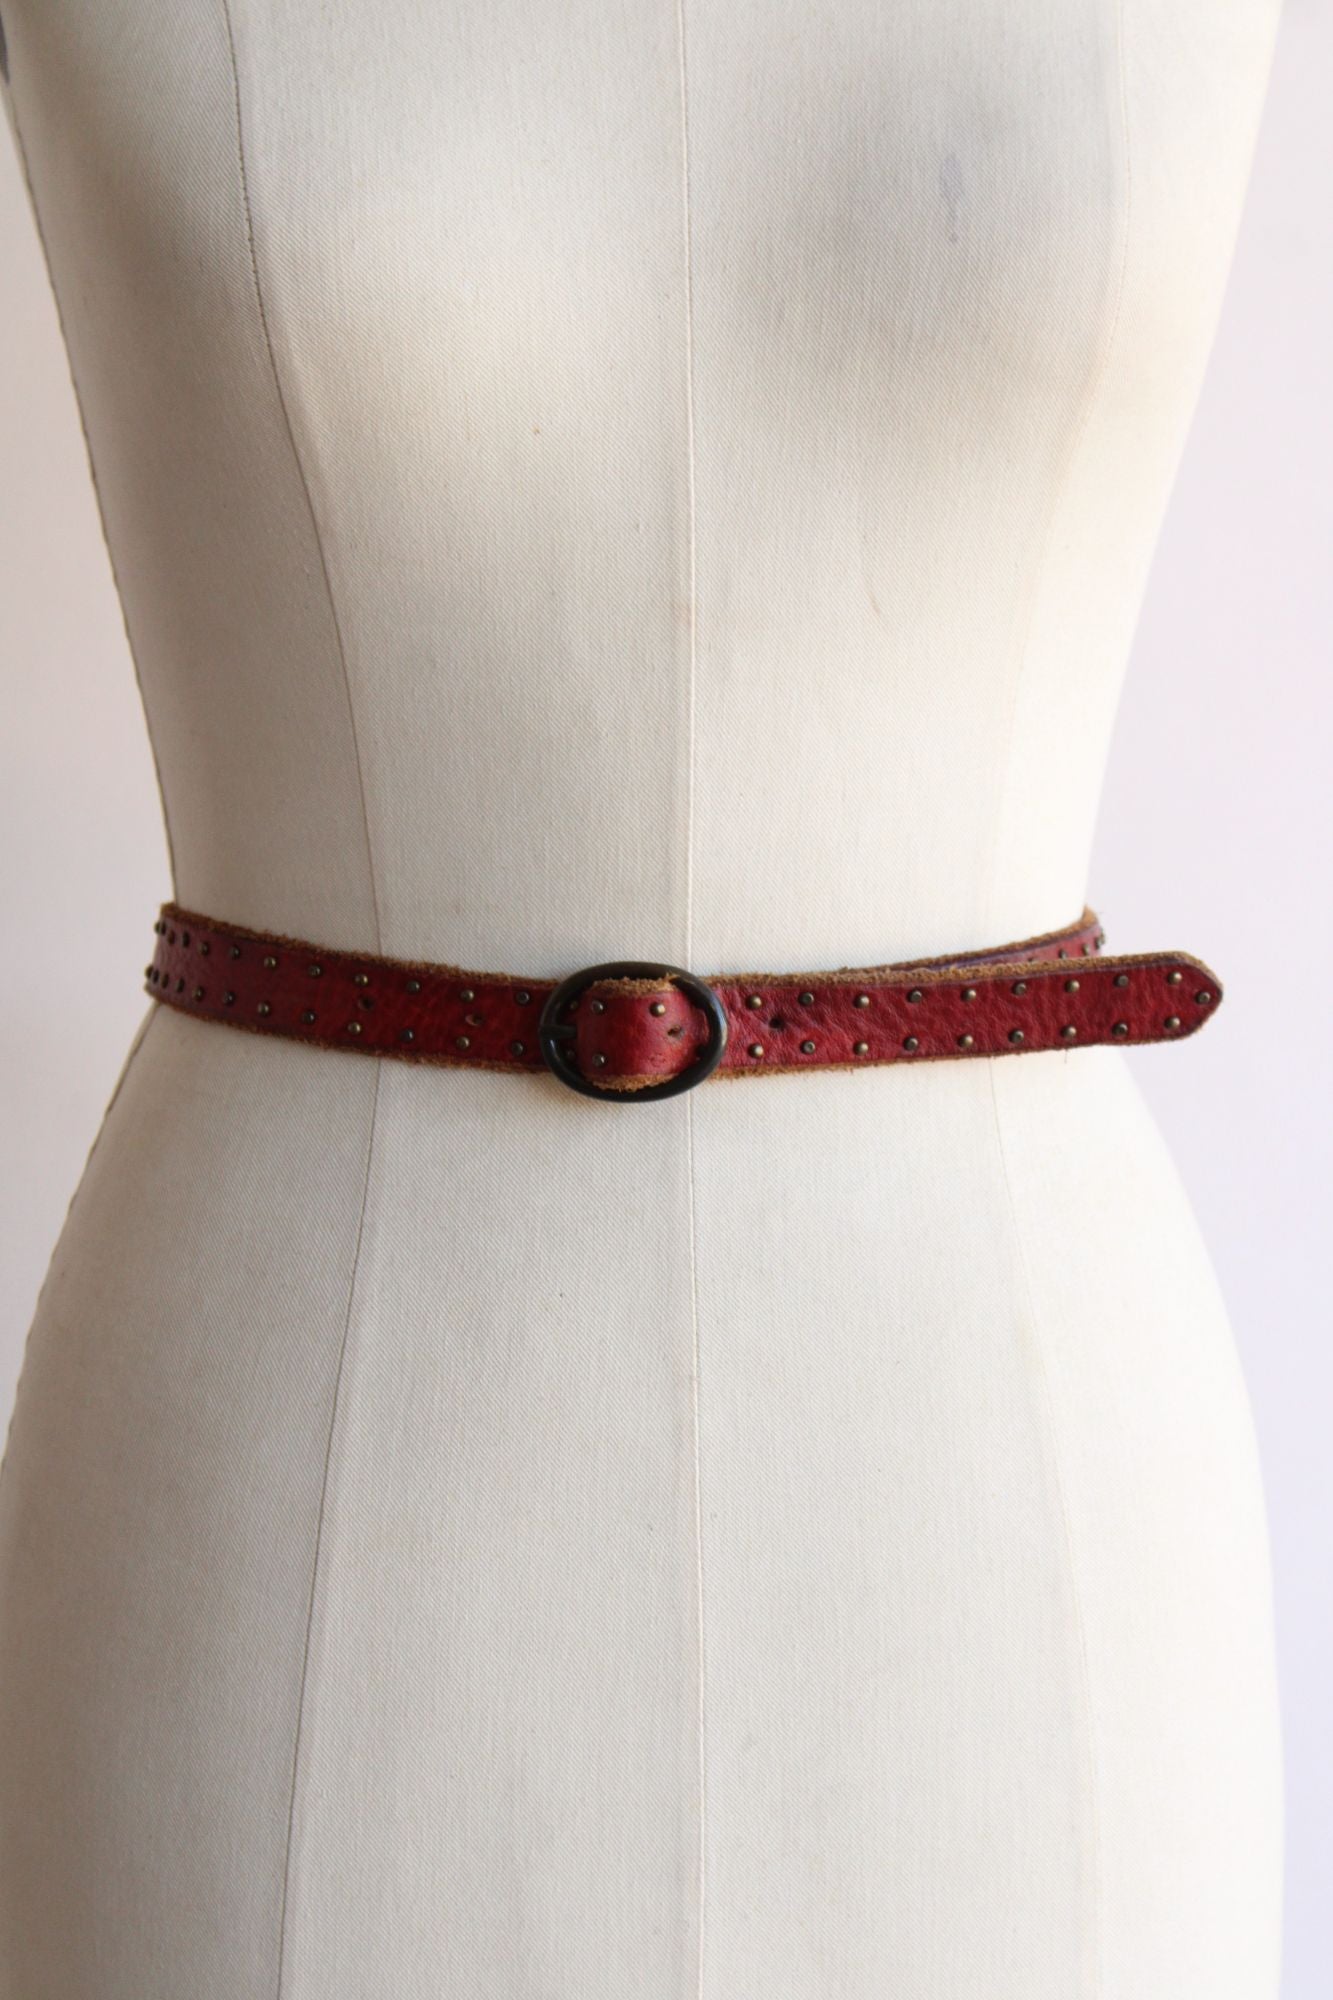 Levis Womens Belt, Red Leather, Studded, Size Large